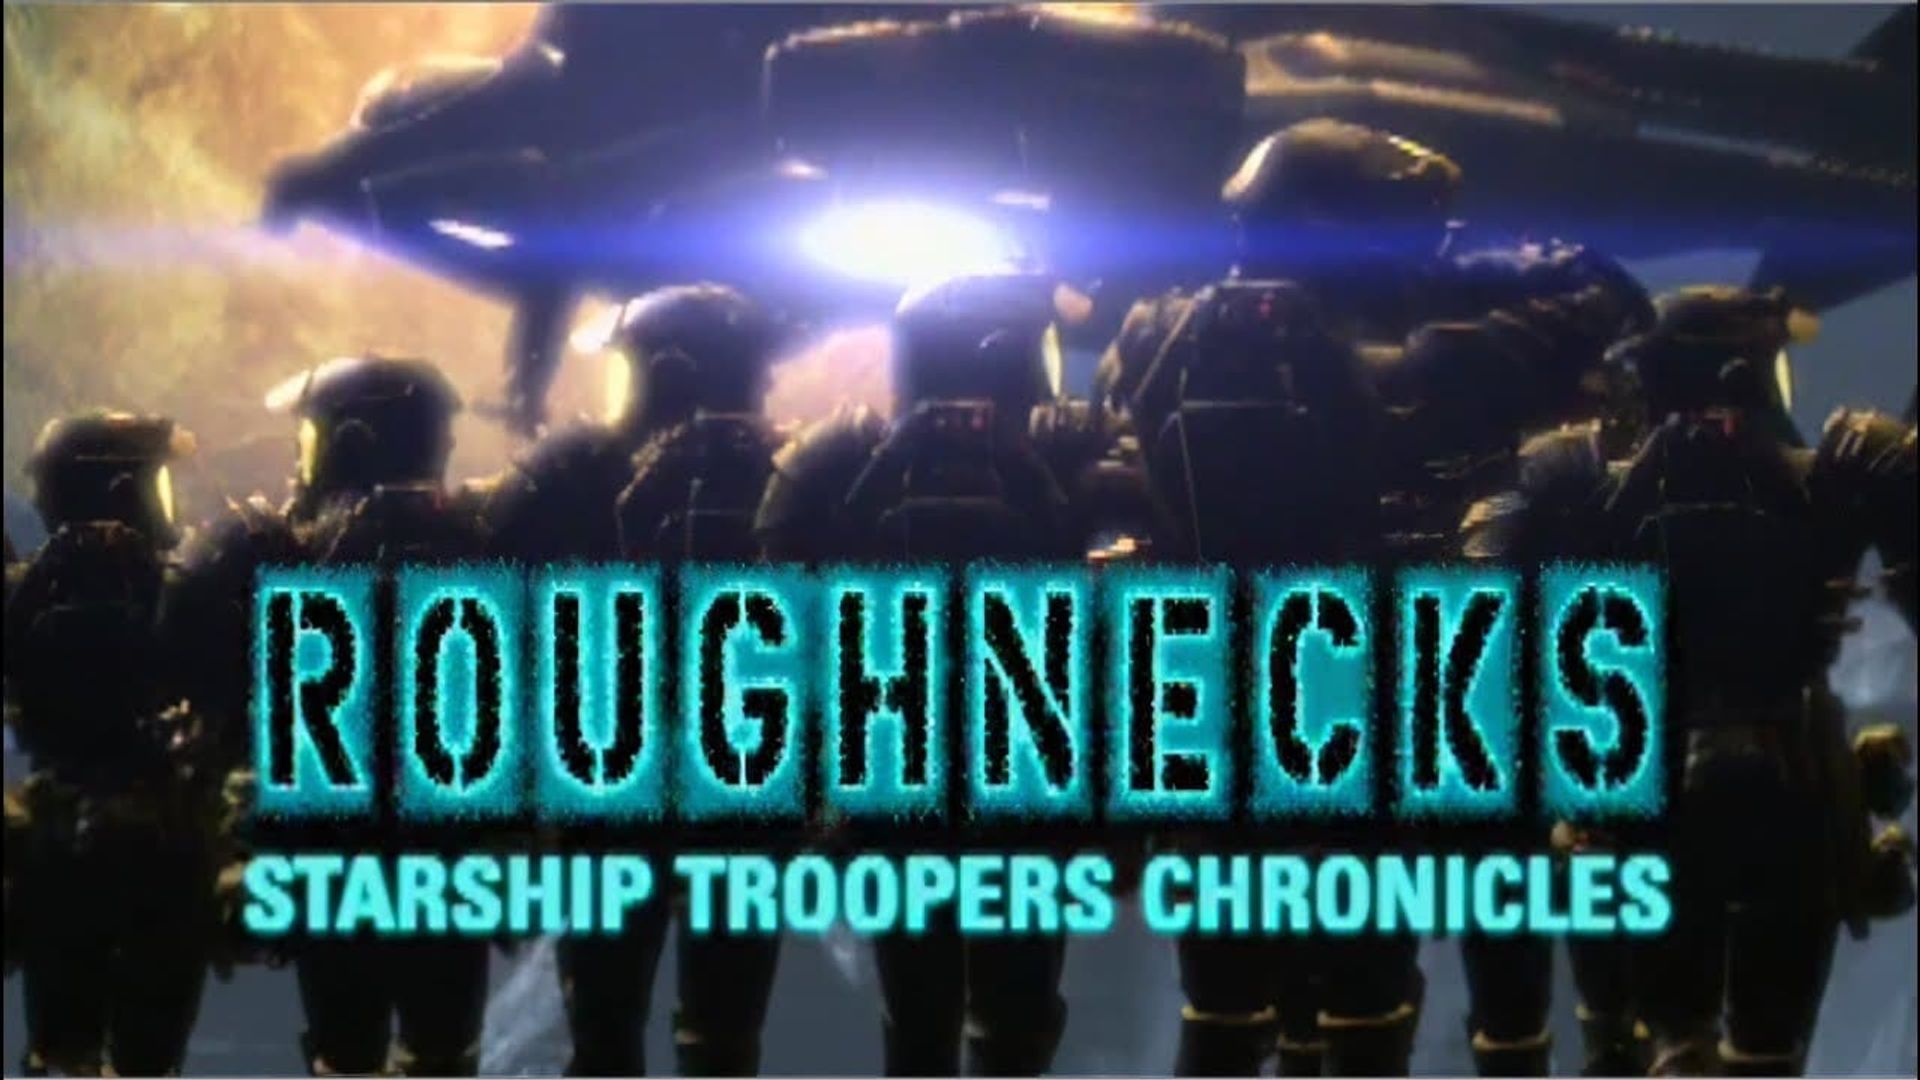 Roughnecks: Starship Troopers Chronicles Backdrop